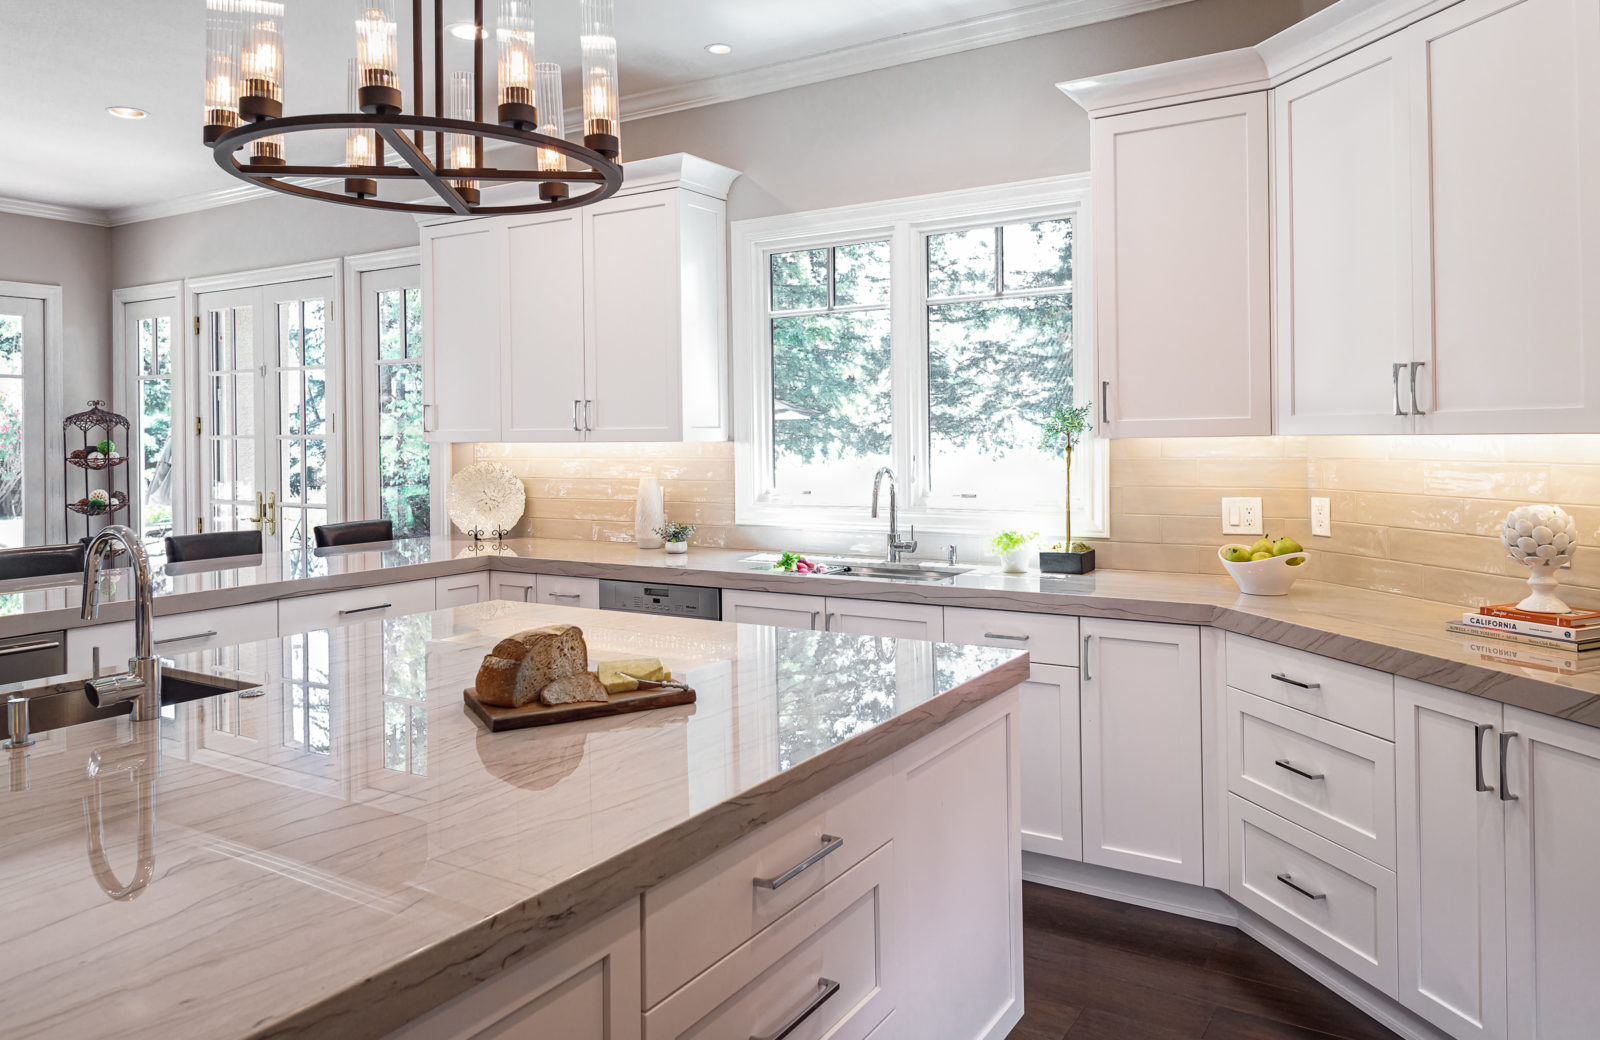 Qartzite countertops and white cabinets on a large island